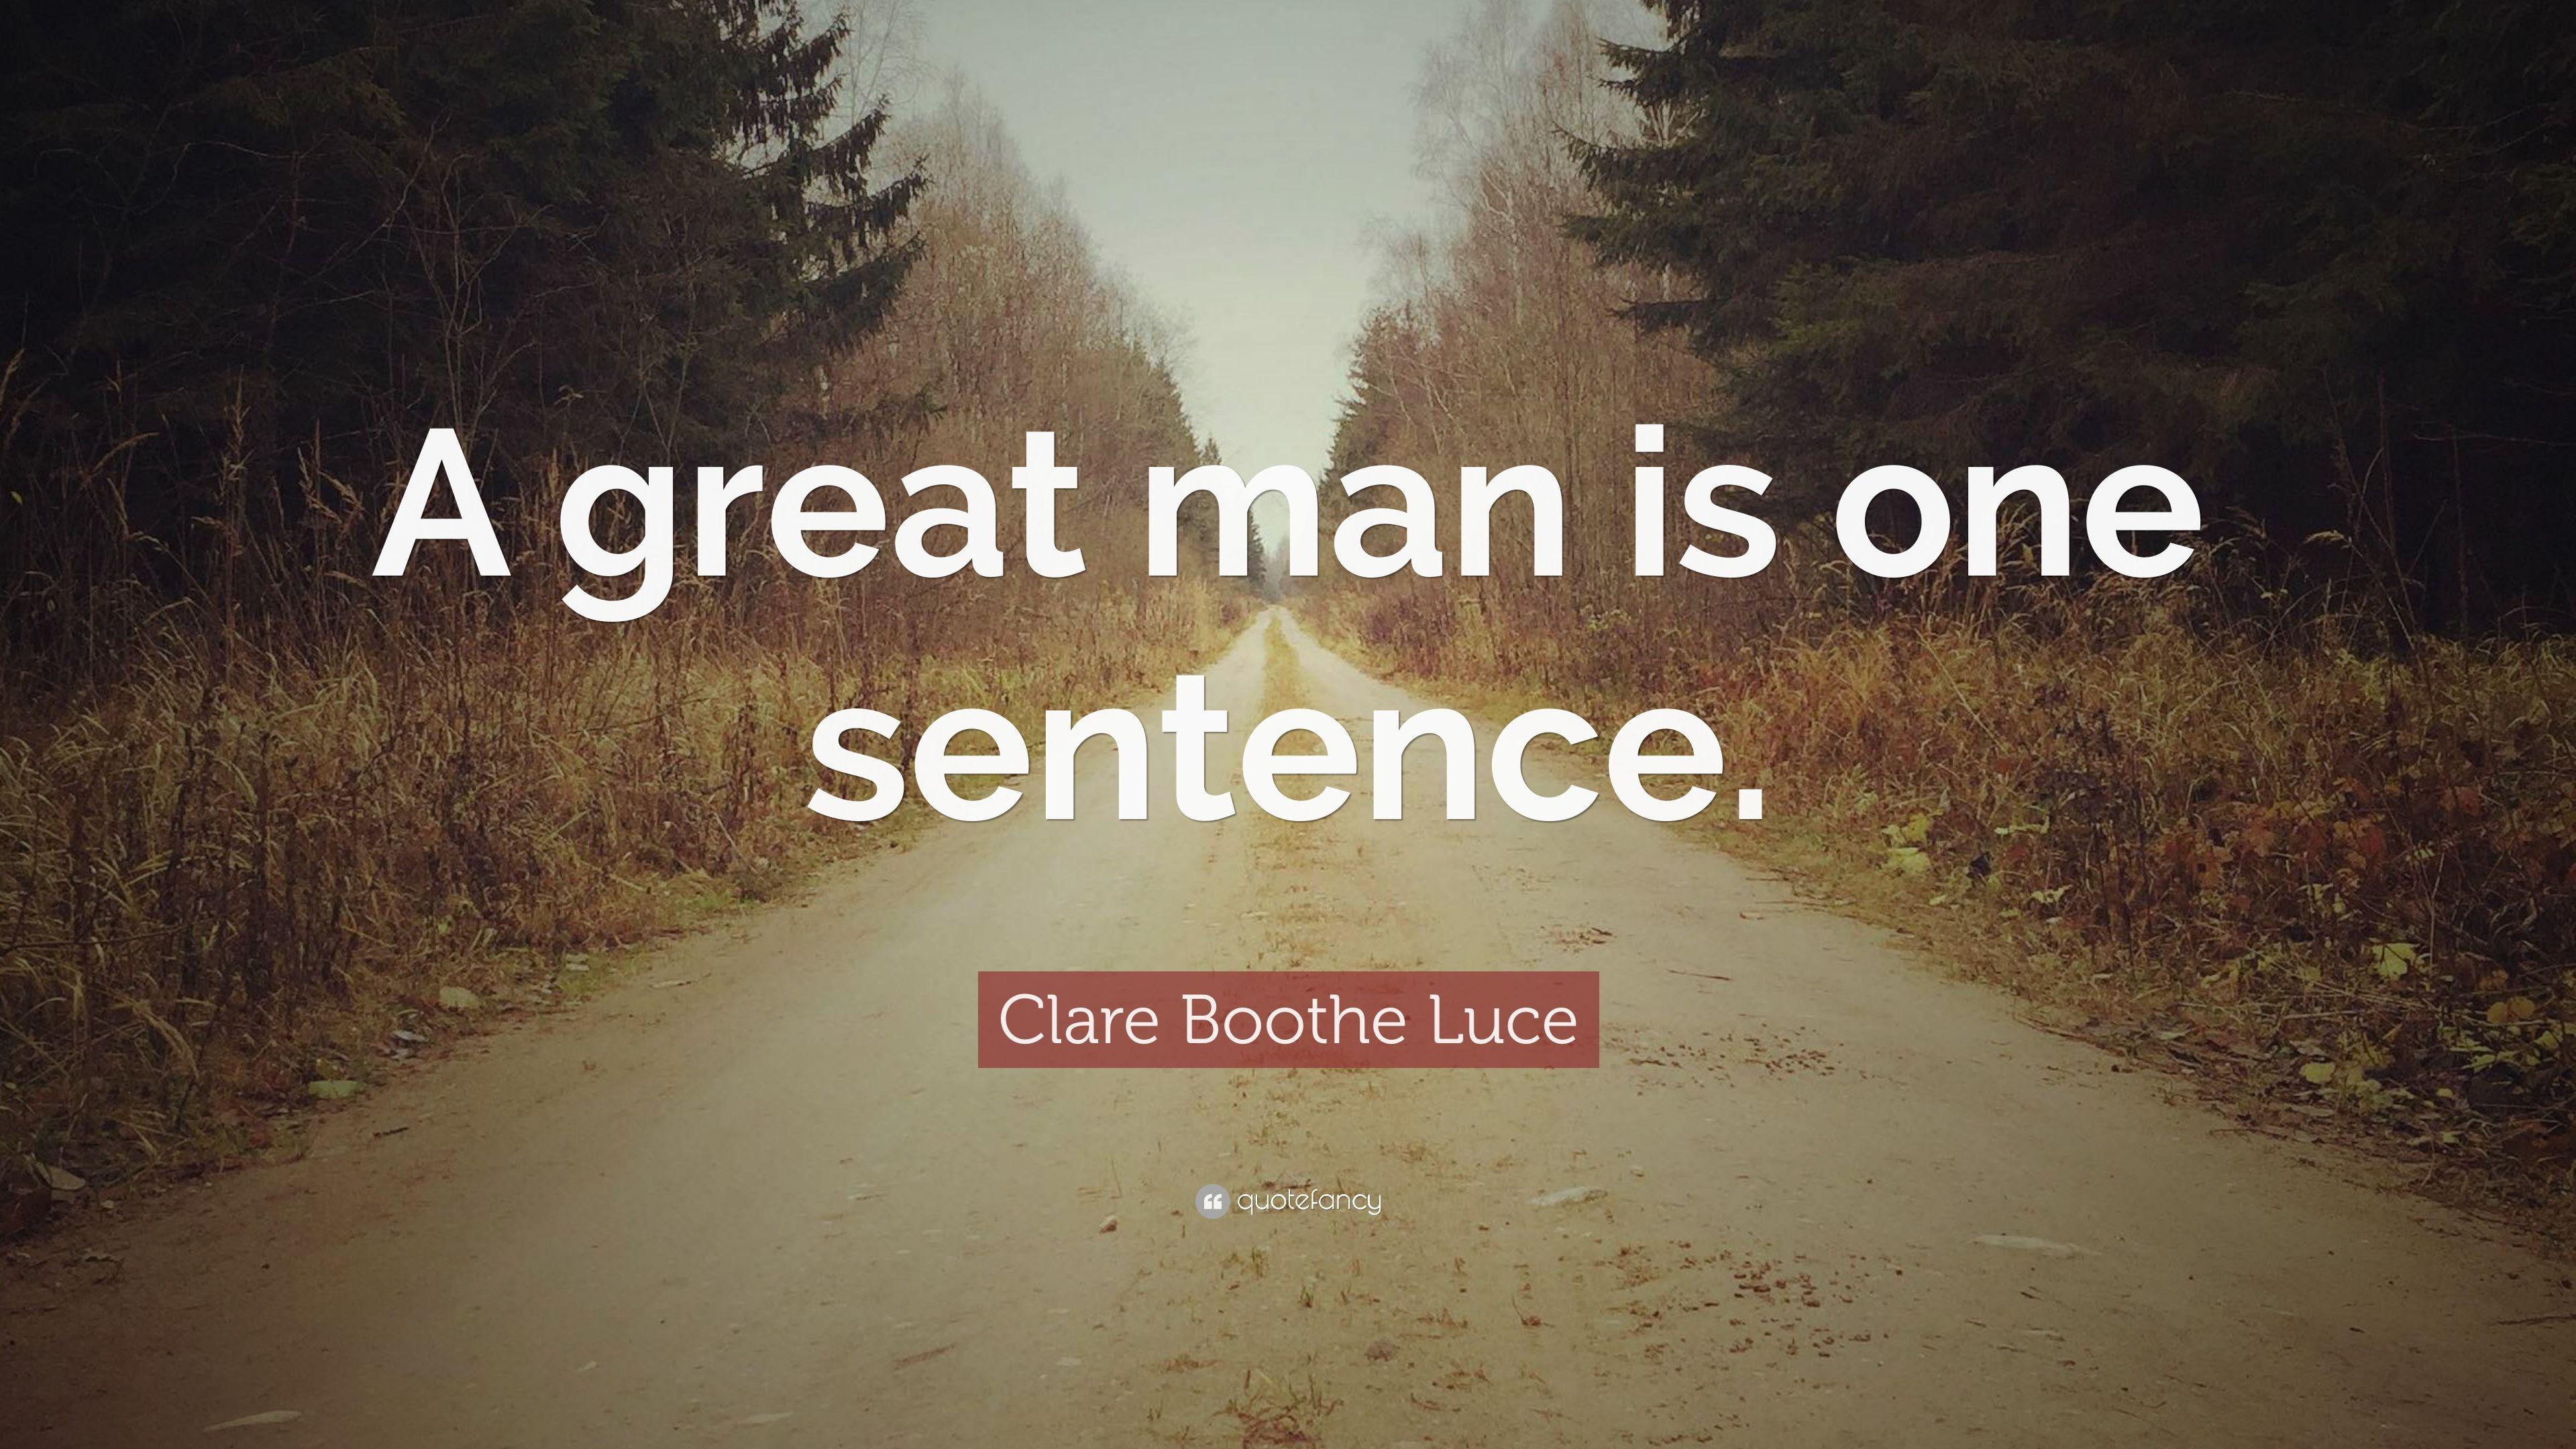 Clare Boothe Luce Quote: “A great man is one sentence.” 9